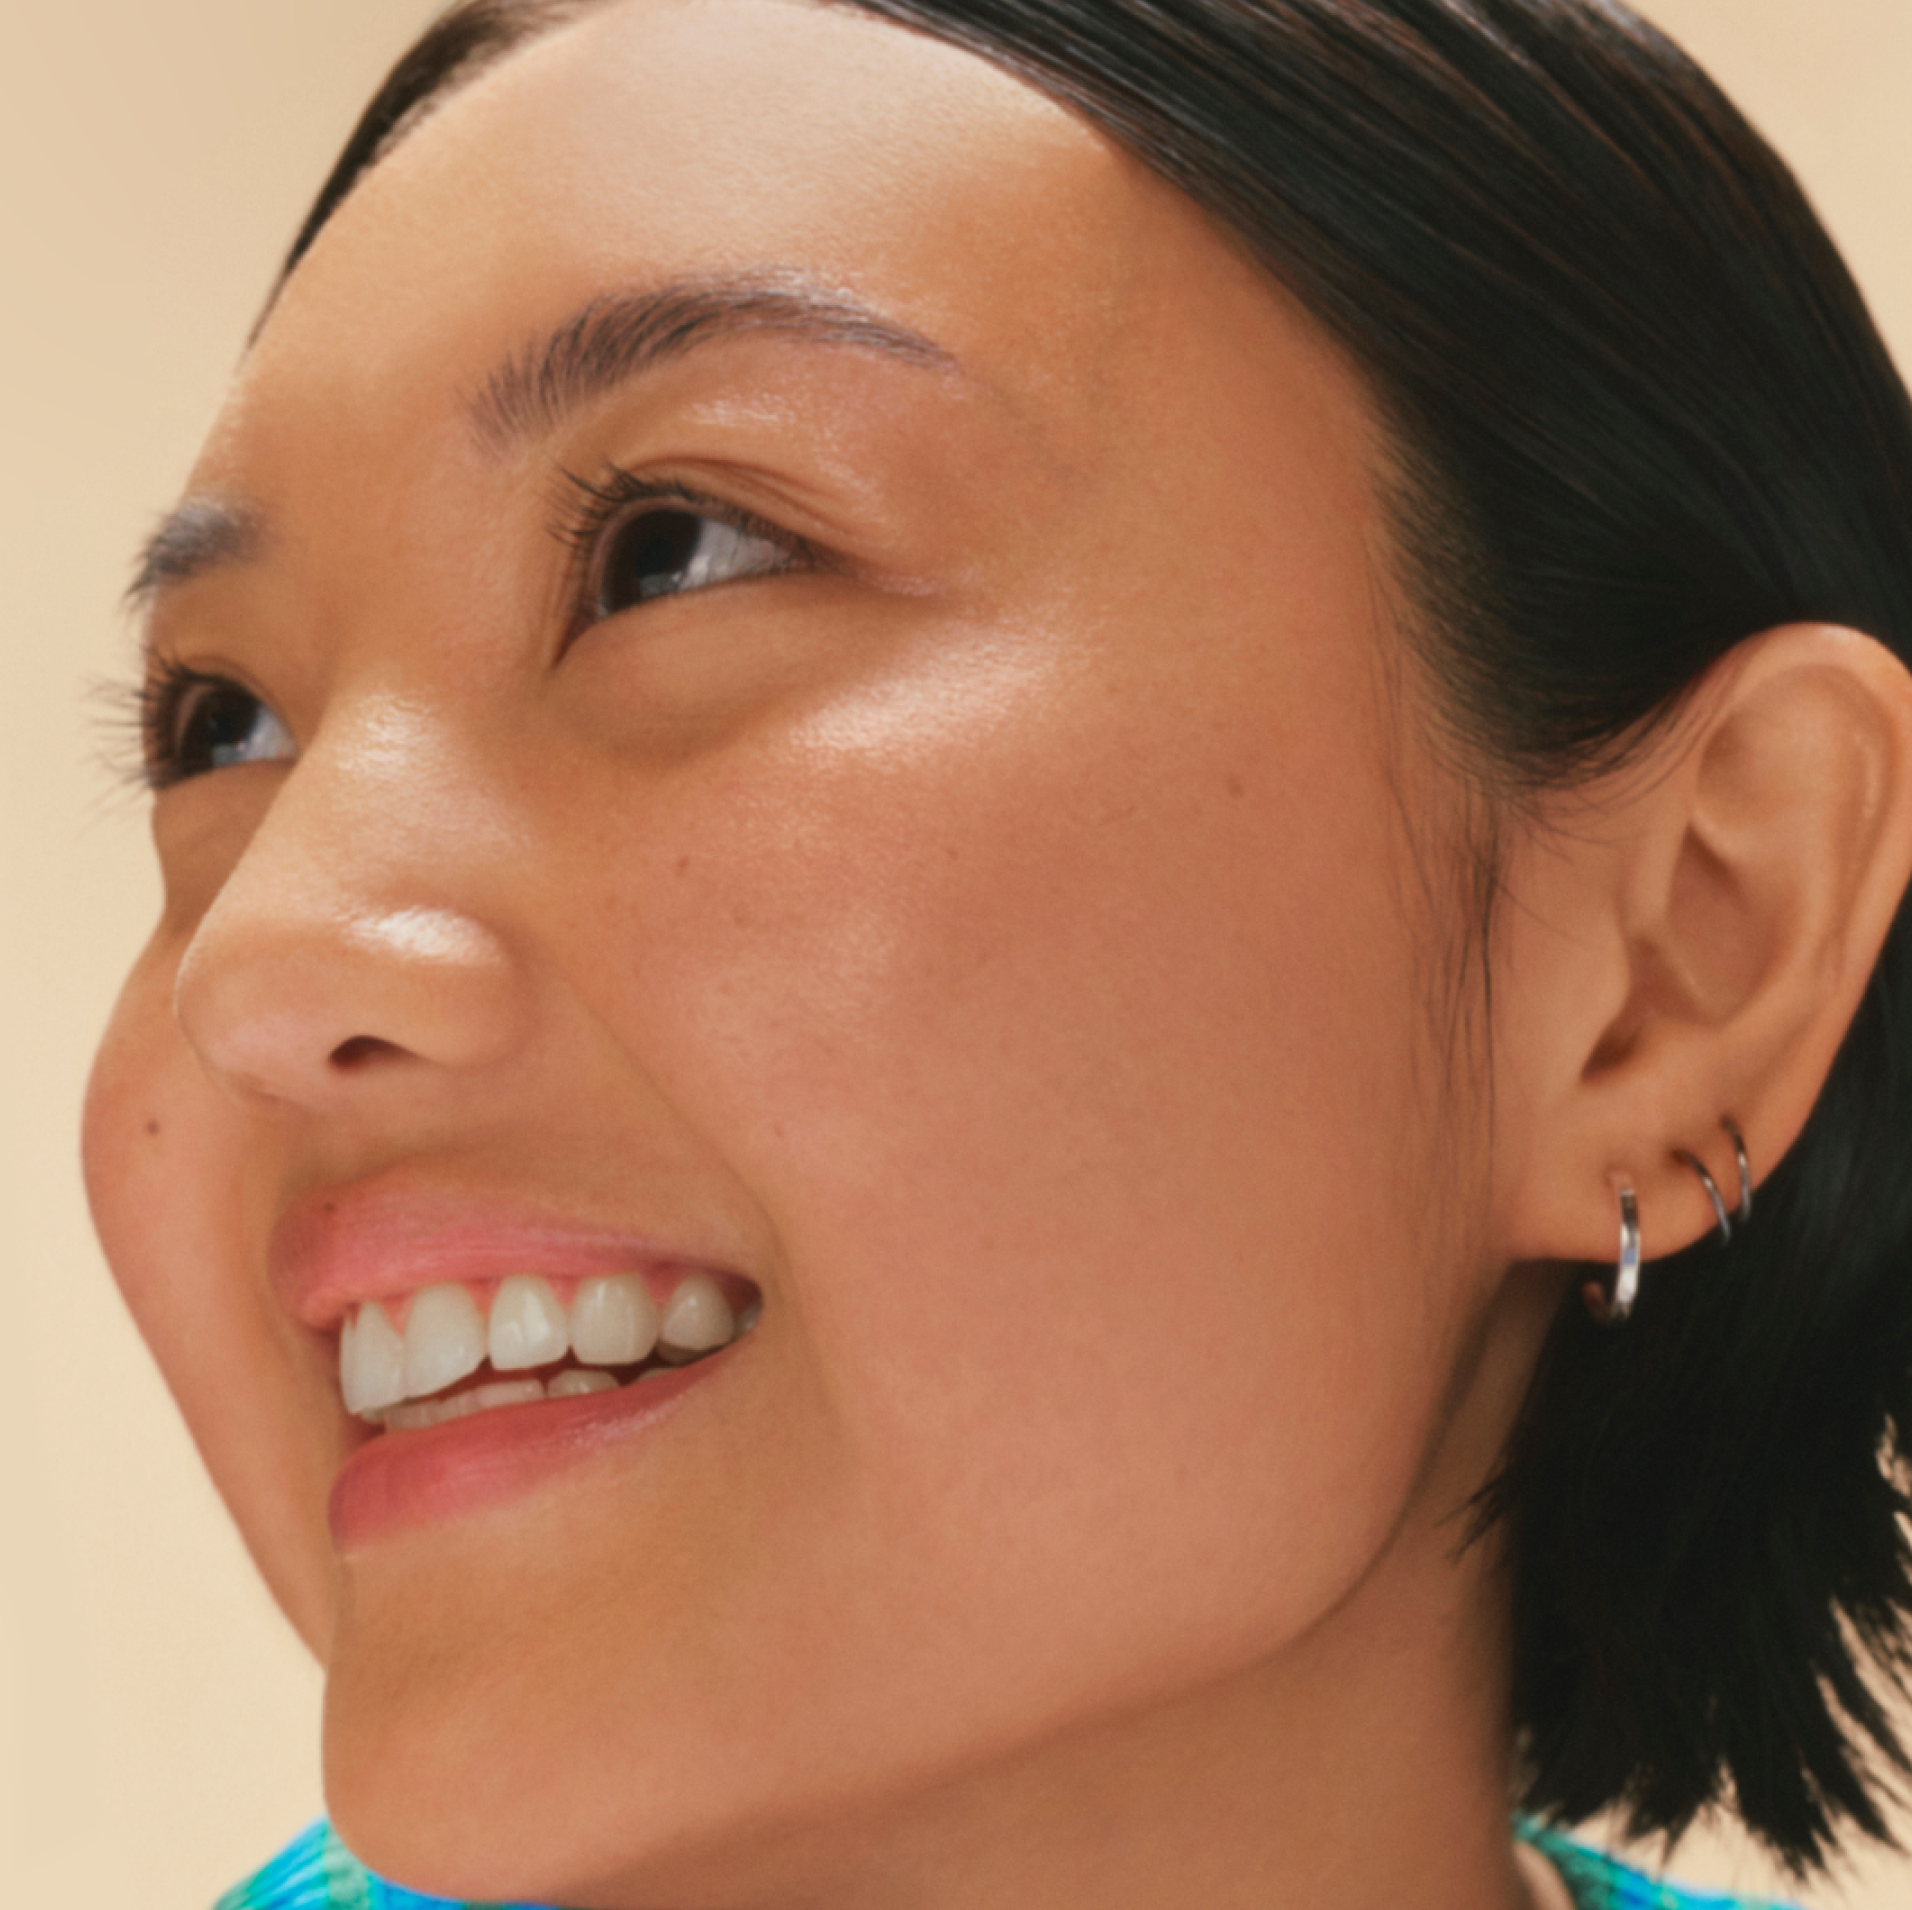 Close-up portrait of a smiling young woman, gazing upward on a warm beige background.